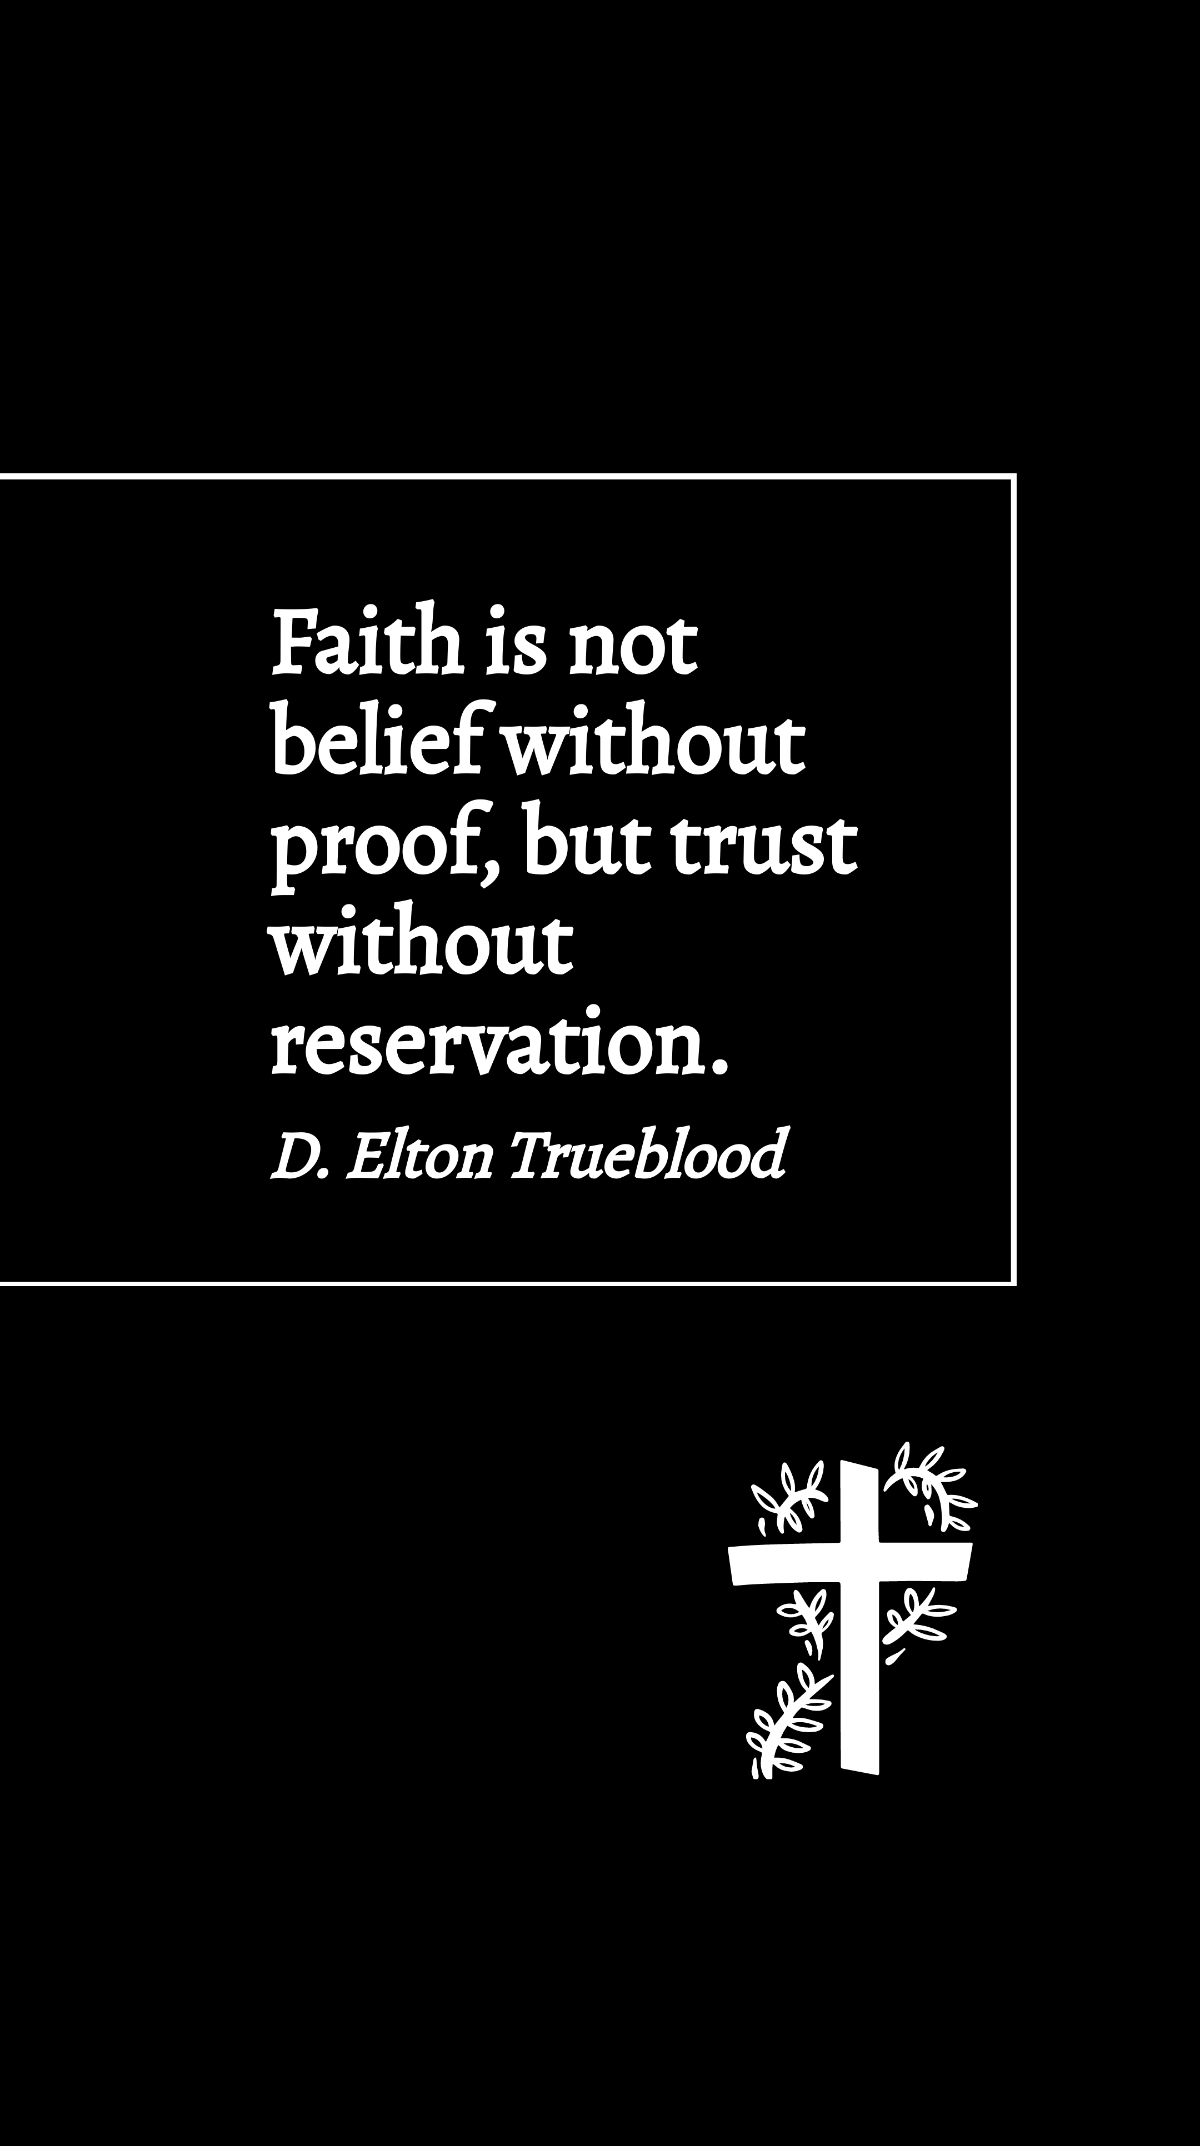 D. Elton Trueblood - Faith is not belief without proof, but trust without reservation. Template